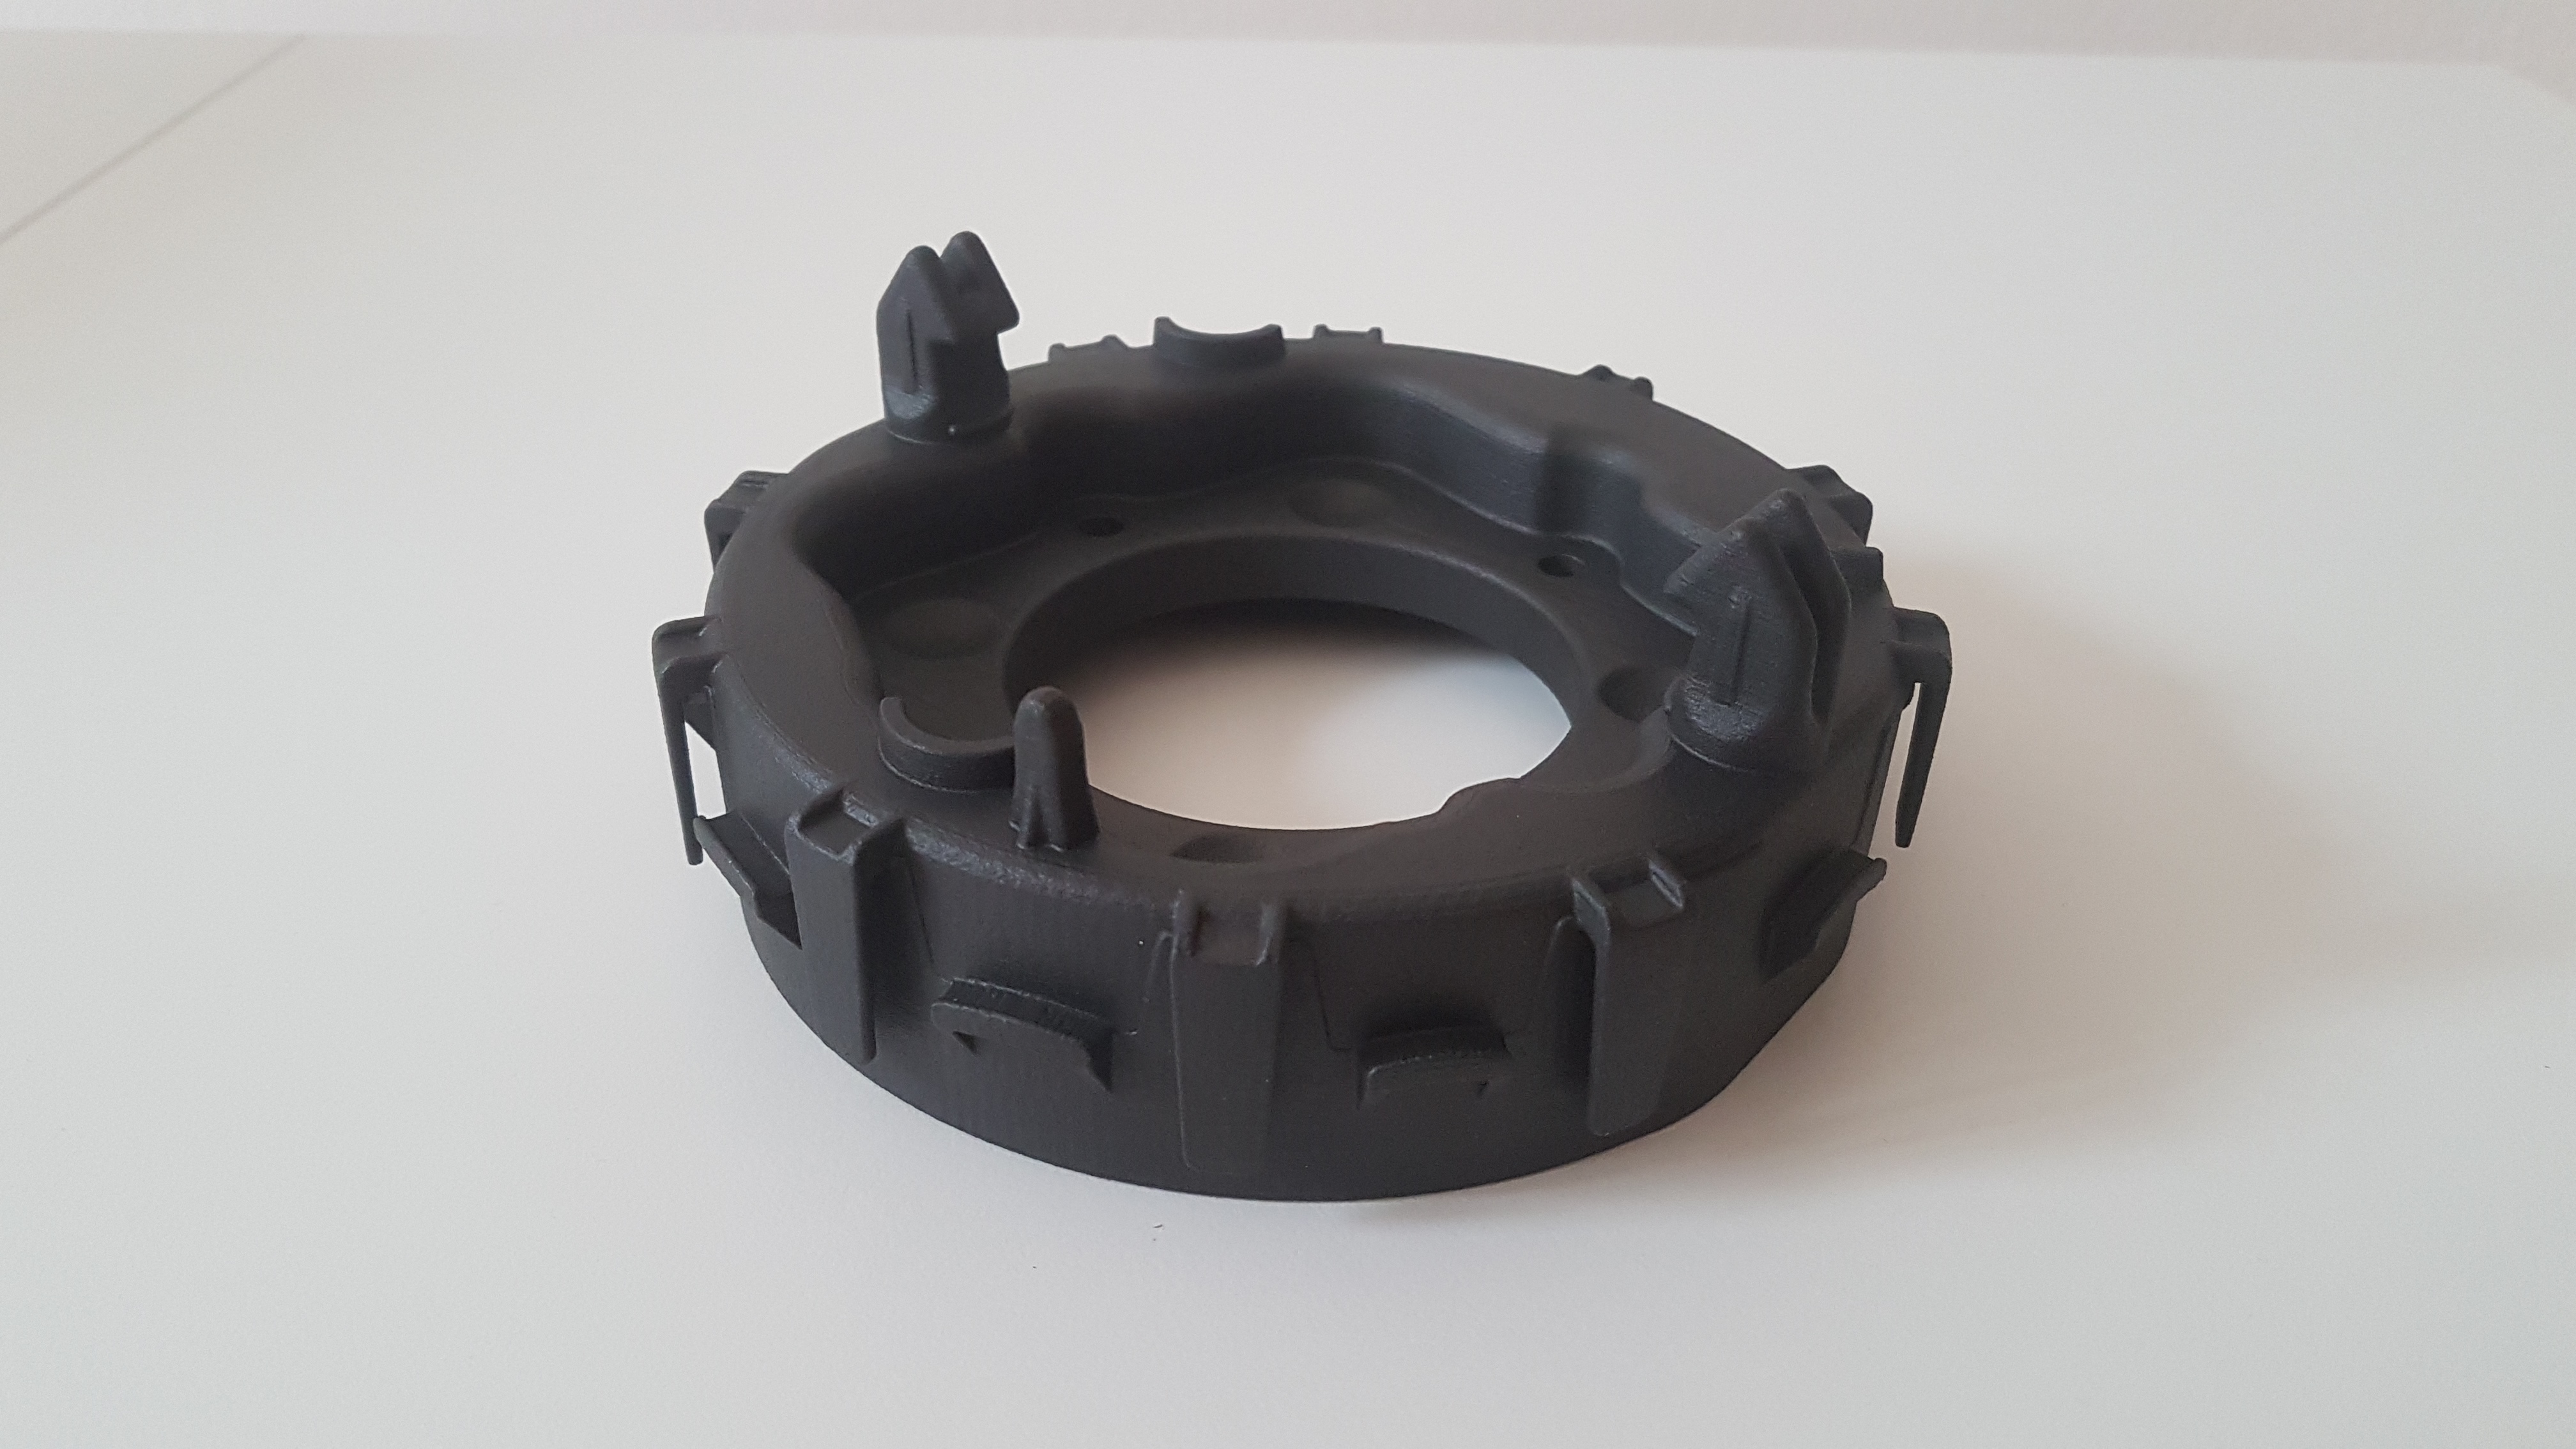 Functional airbag housing container produced via 3D printing with CRP  Technology - 3D Printing Industry